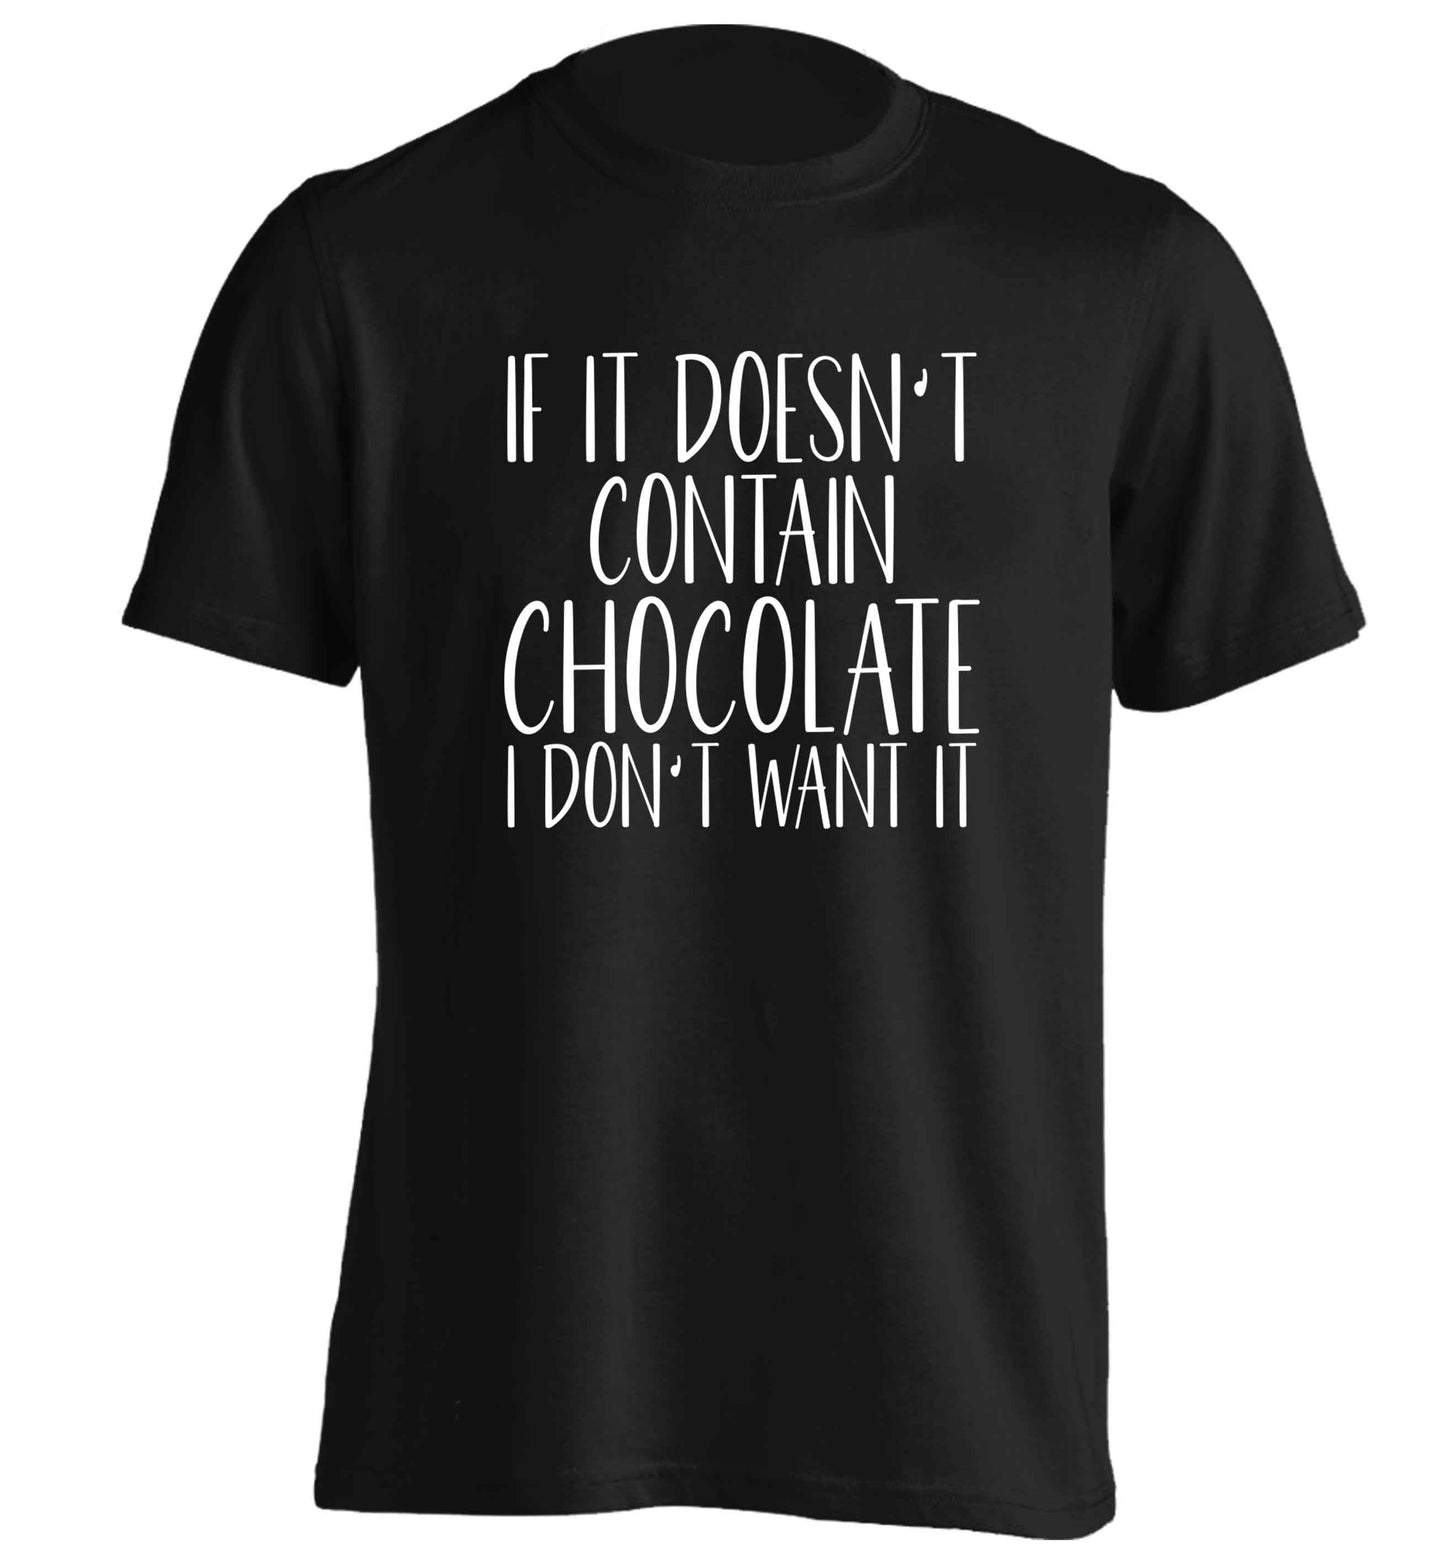 If it doesn't contain chocolate I don't want it adults unisex black Tshirt 2XL